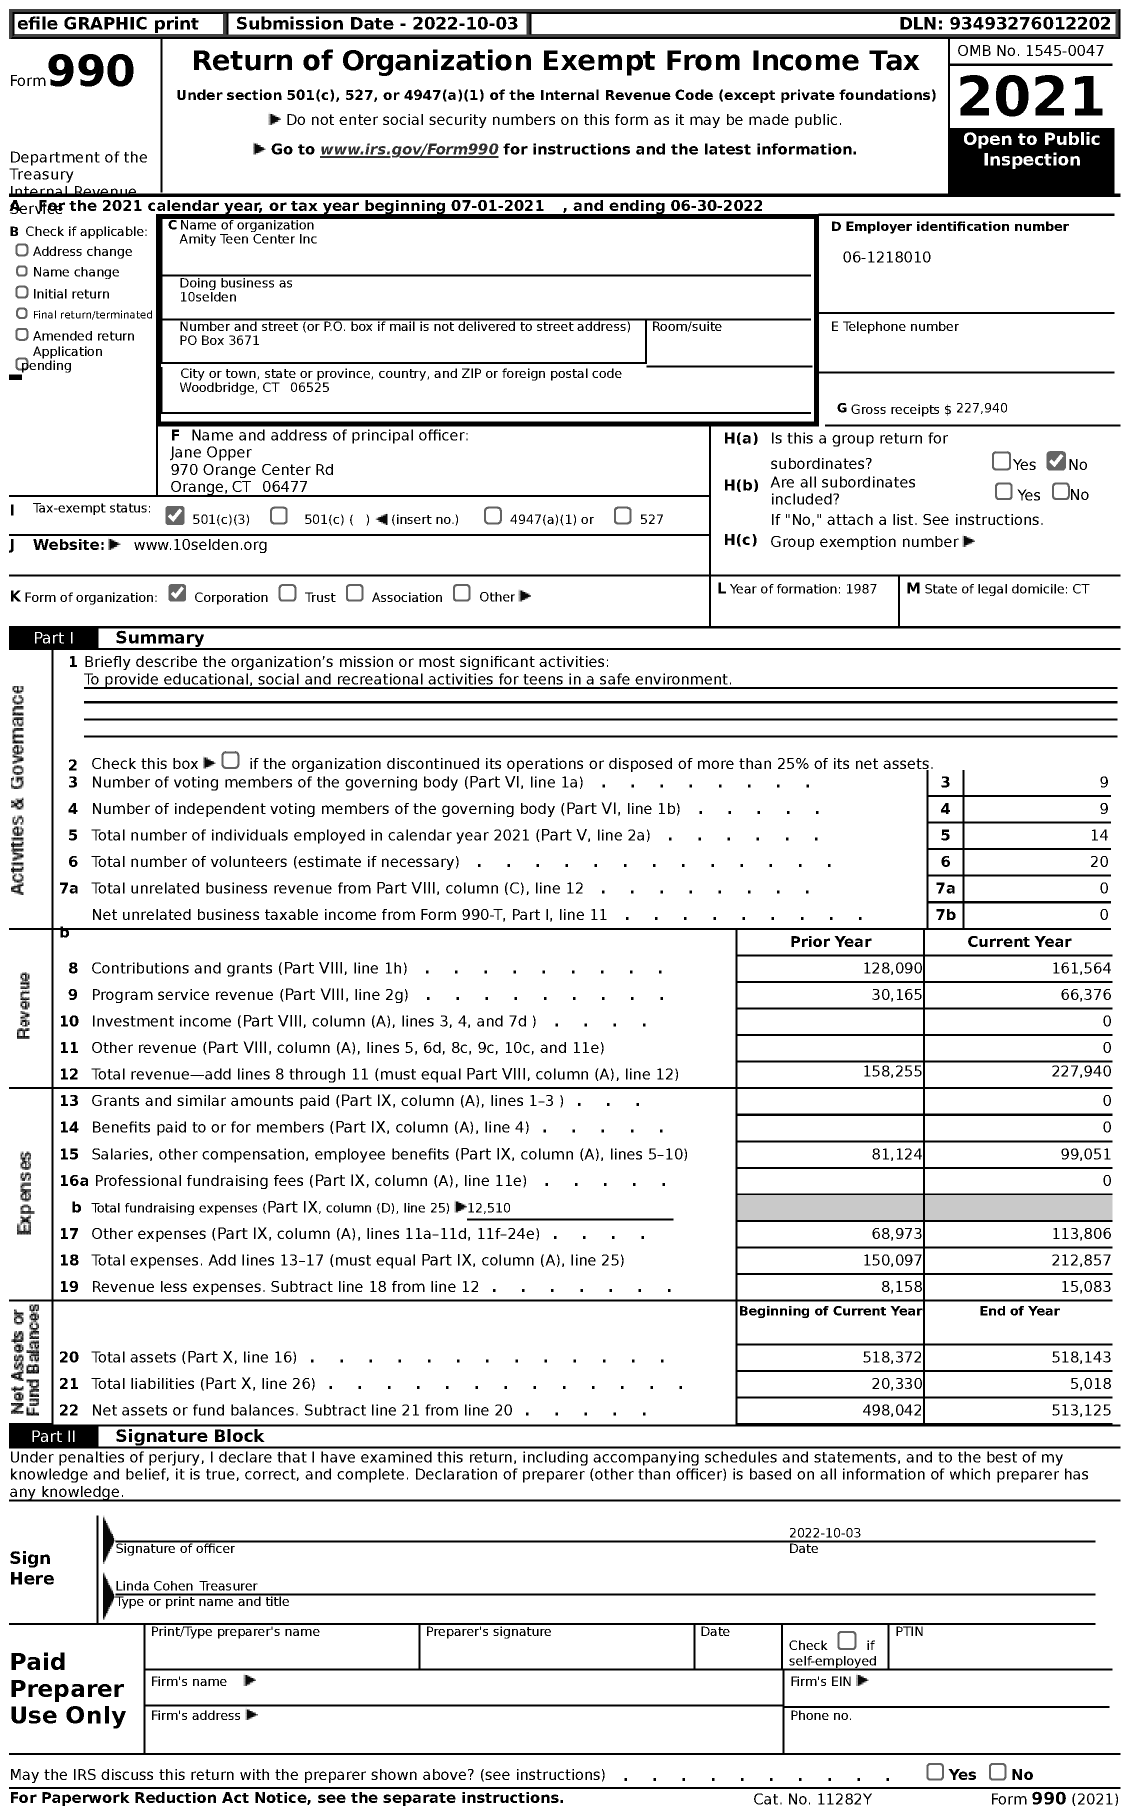 Image of first page of 2021 Form 990 for 10selden